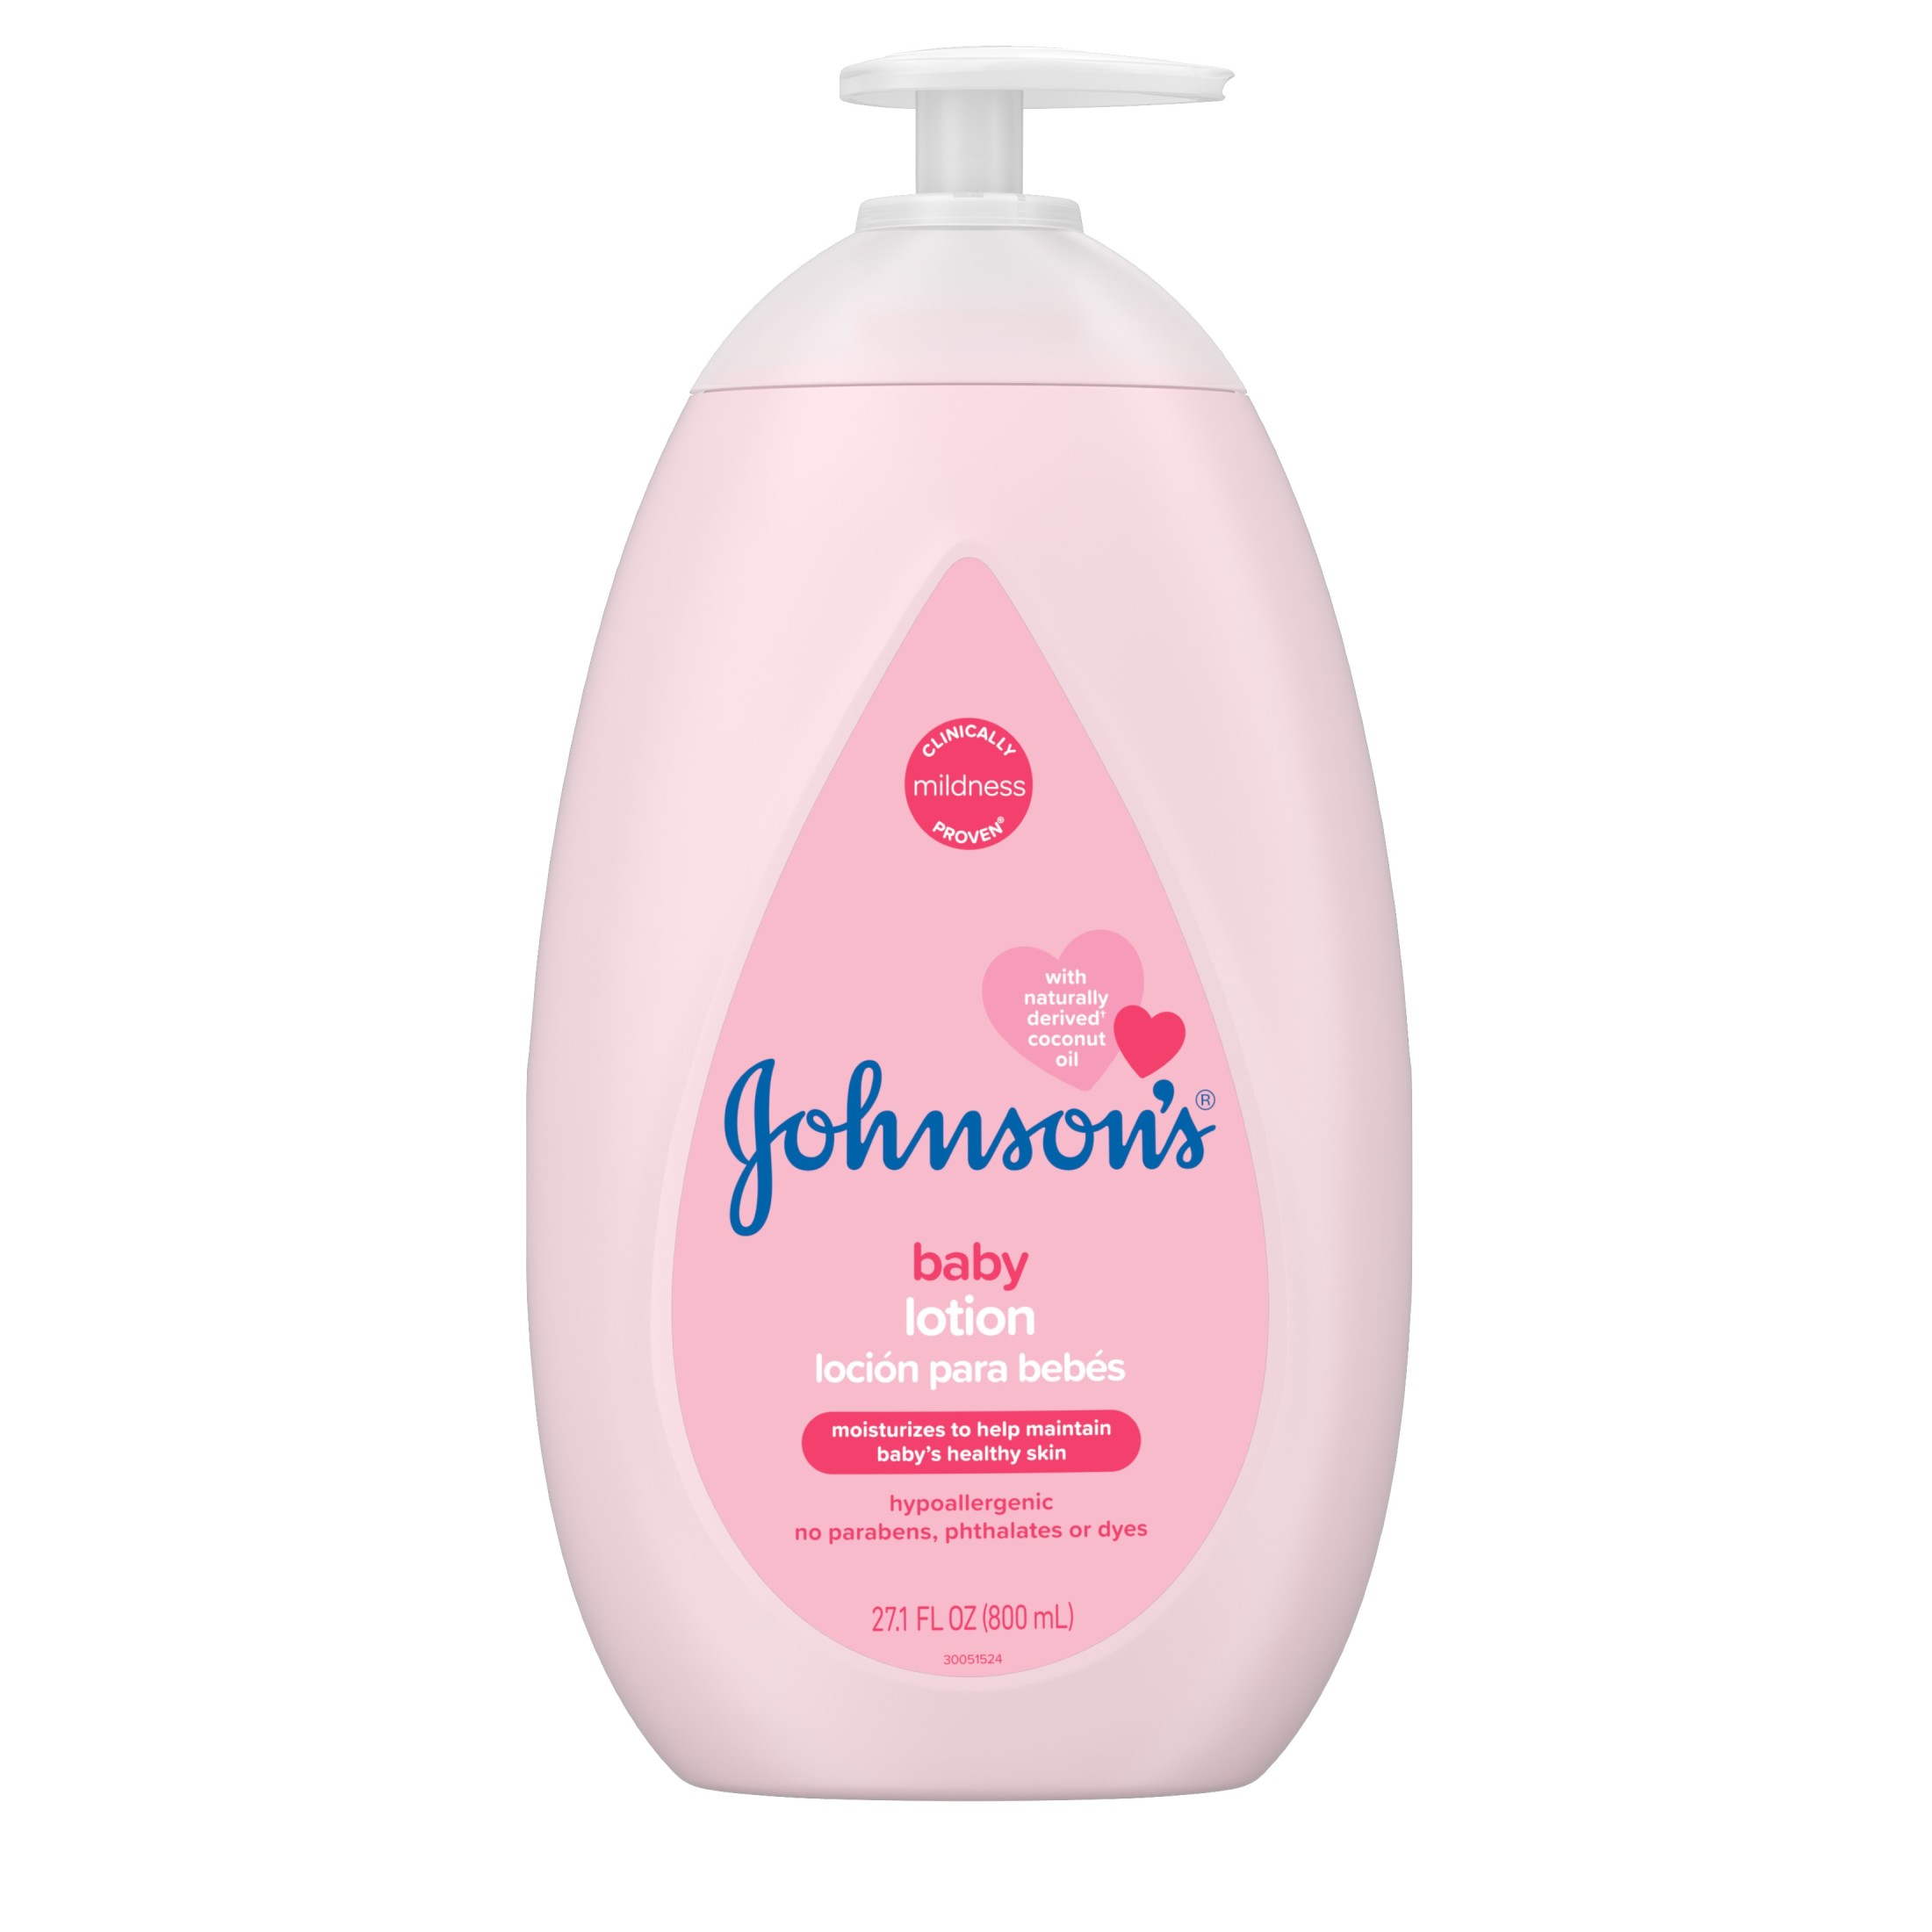 Johnson's Moisturizing Pink Baby Body Lotion with Coconut Oil, 27.1 oz - image 3 of 9